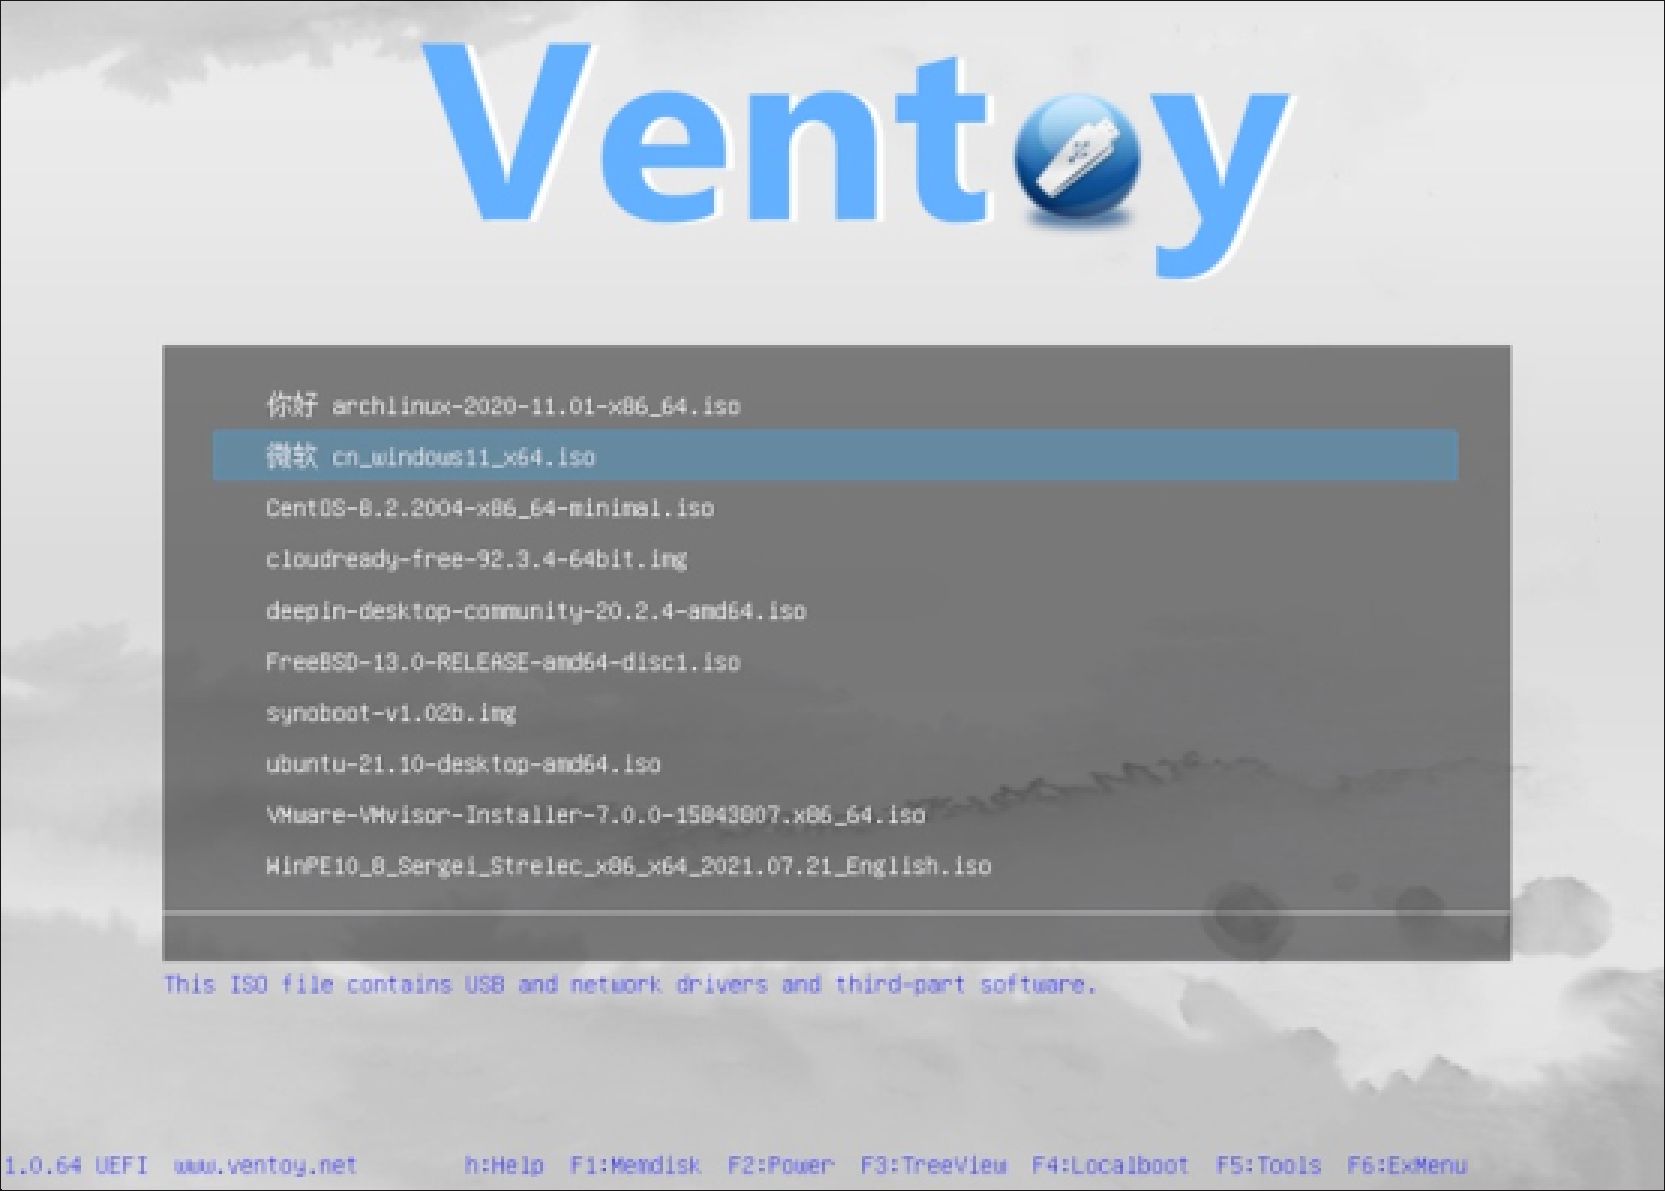 Ventoy Review